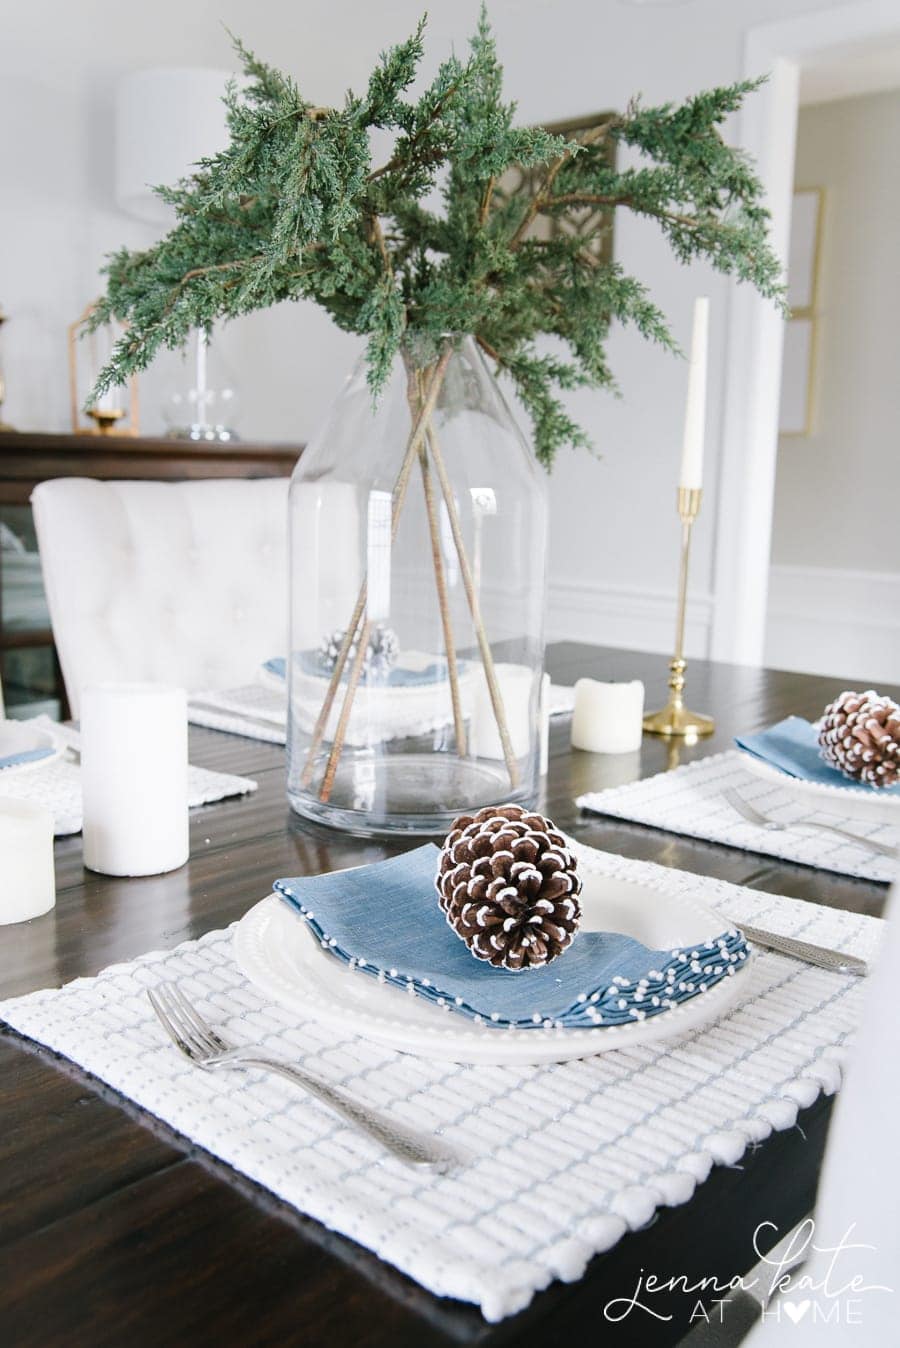 A complete look - pine cones, greenery, soft accents complete the winter tablescape 